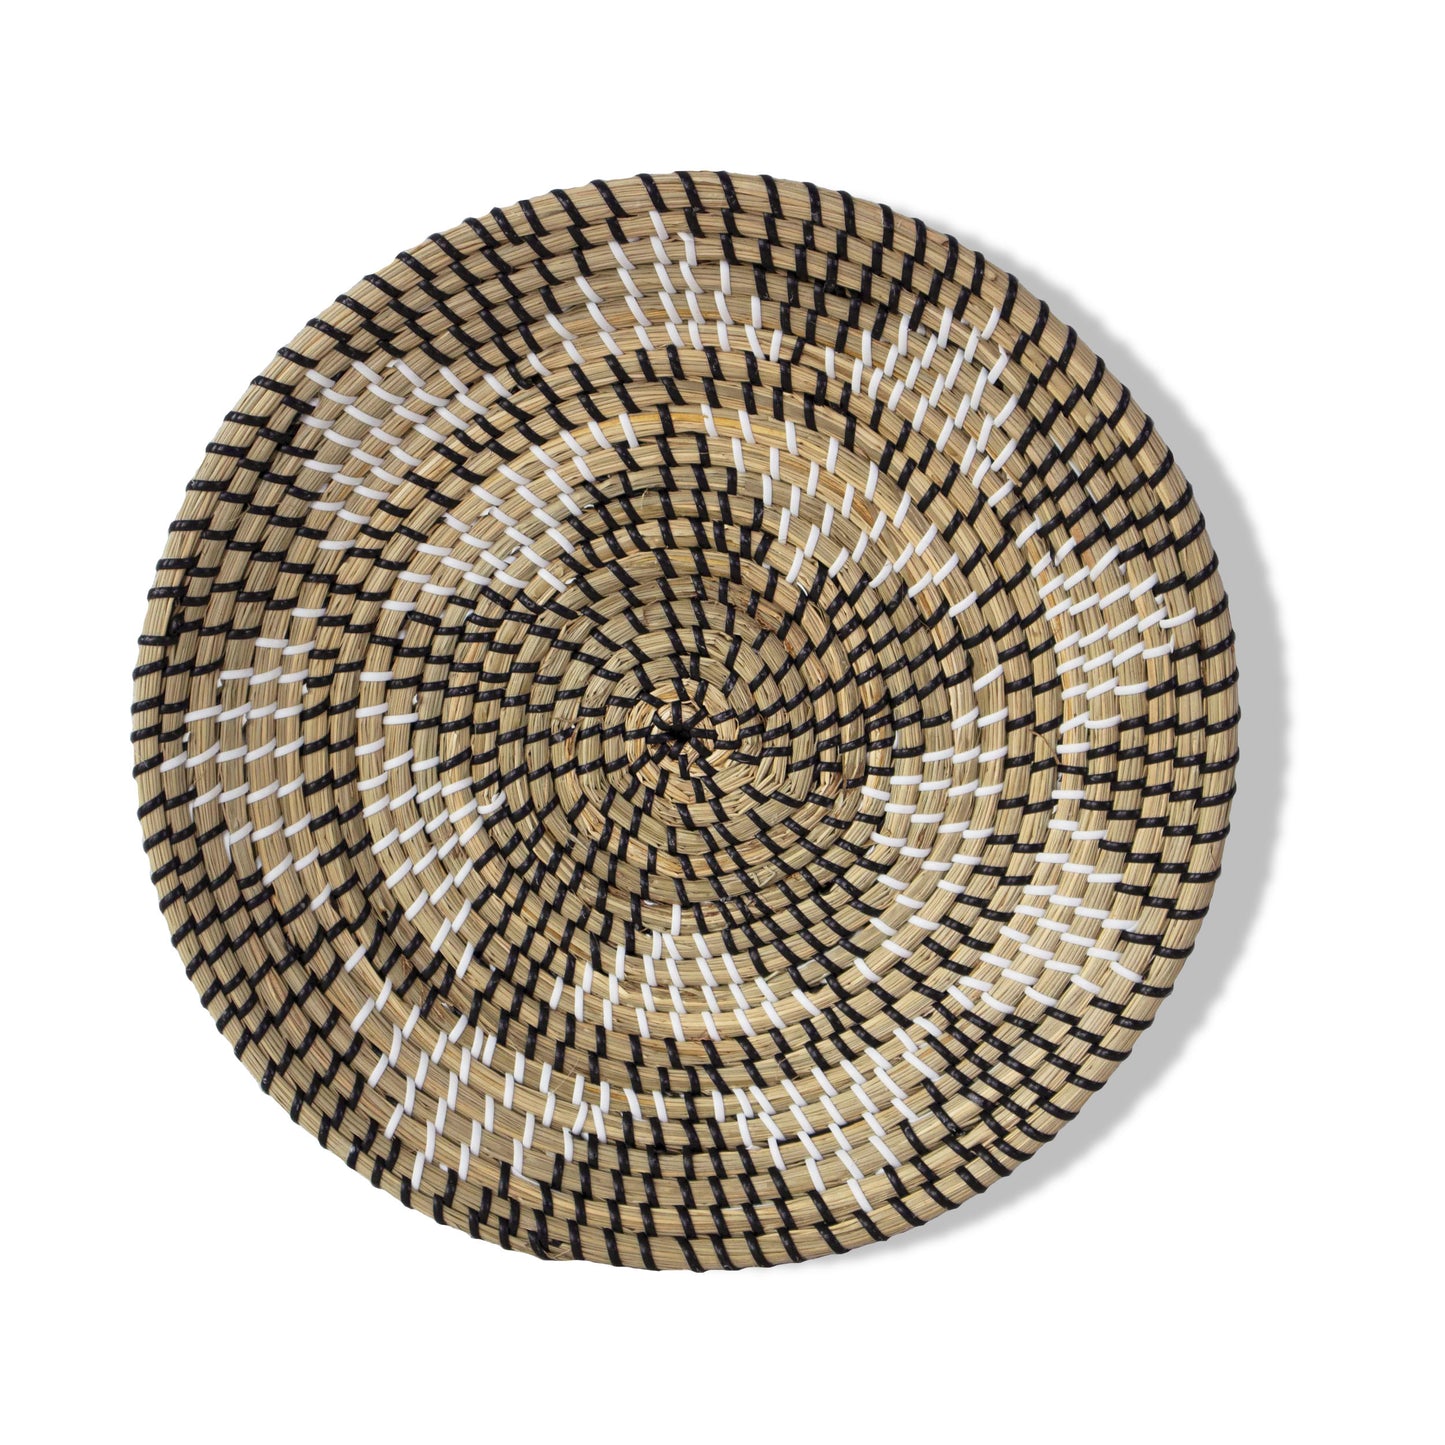 Natural Seagrass Woven Fruit Basket Bowl | Rustic Boho Decor Wall Hanging for Home Decoration and Display